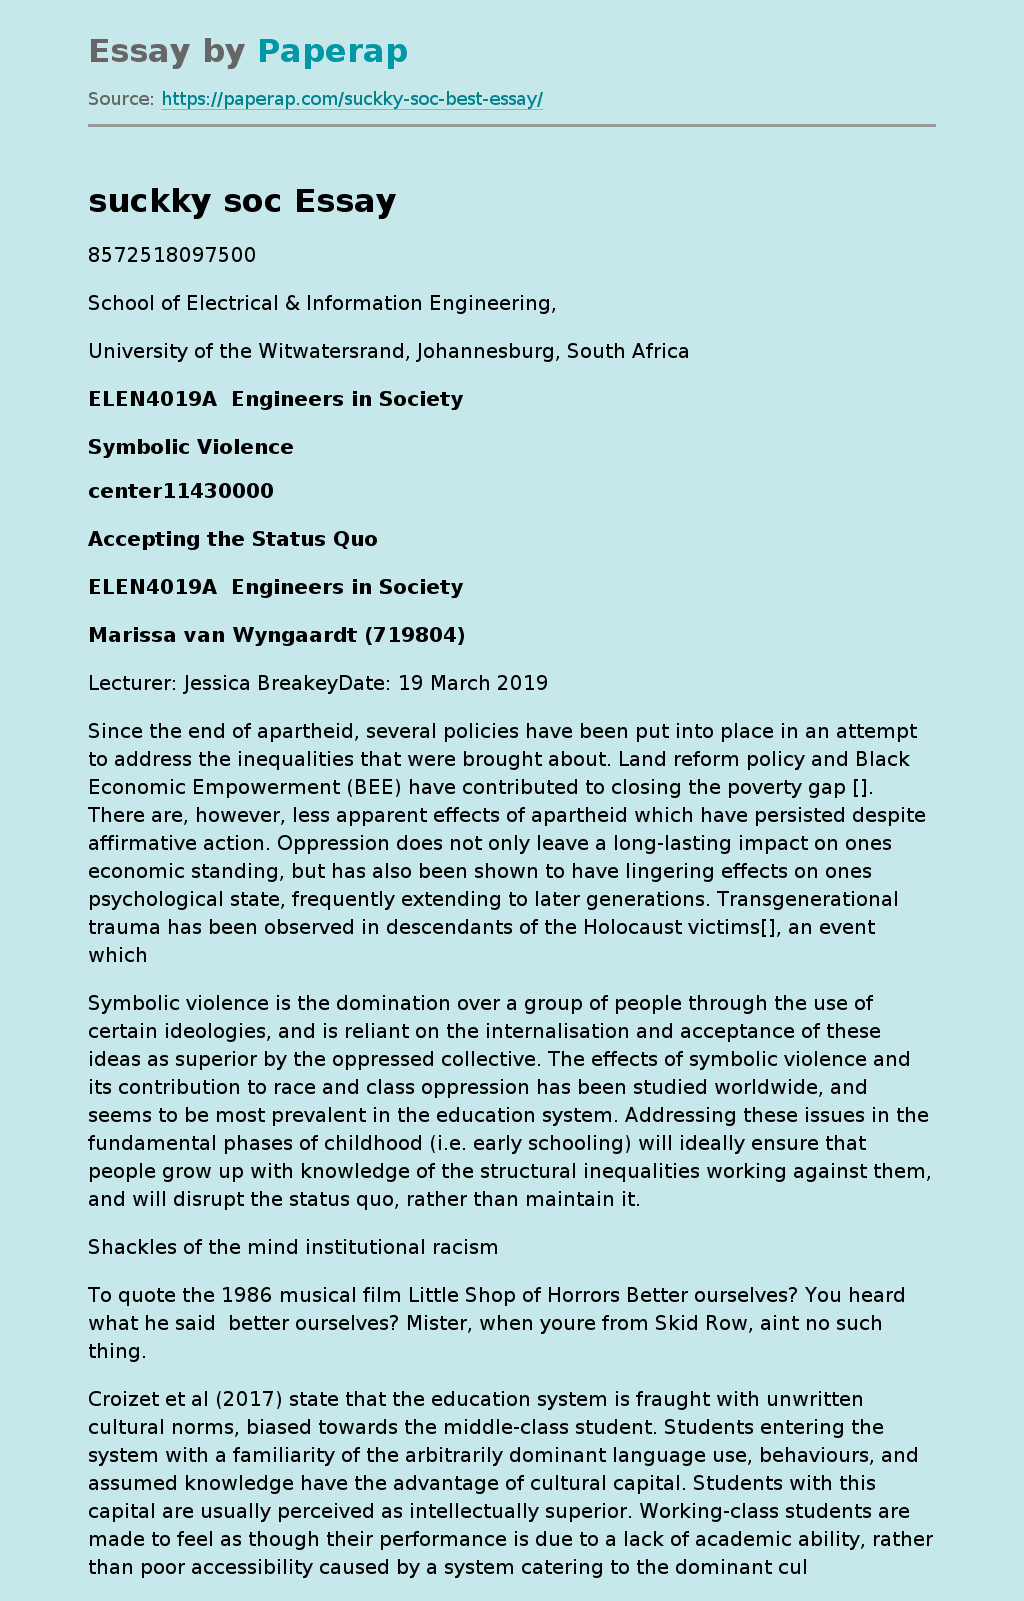 ELEN4019A Course at Wits University